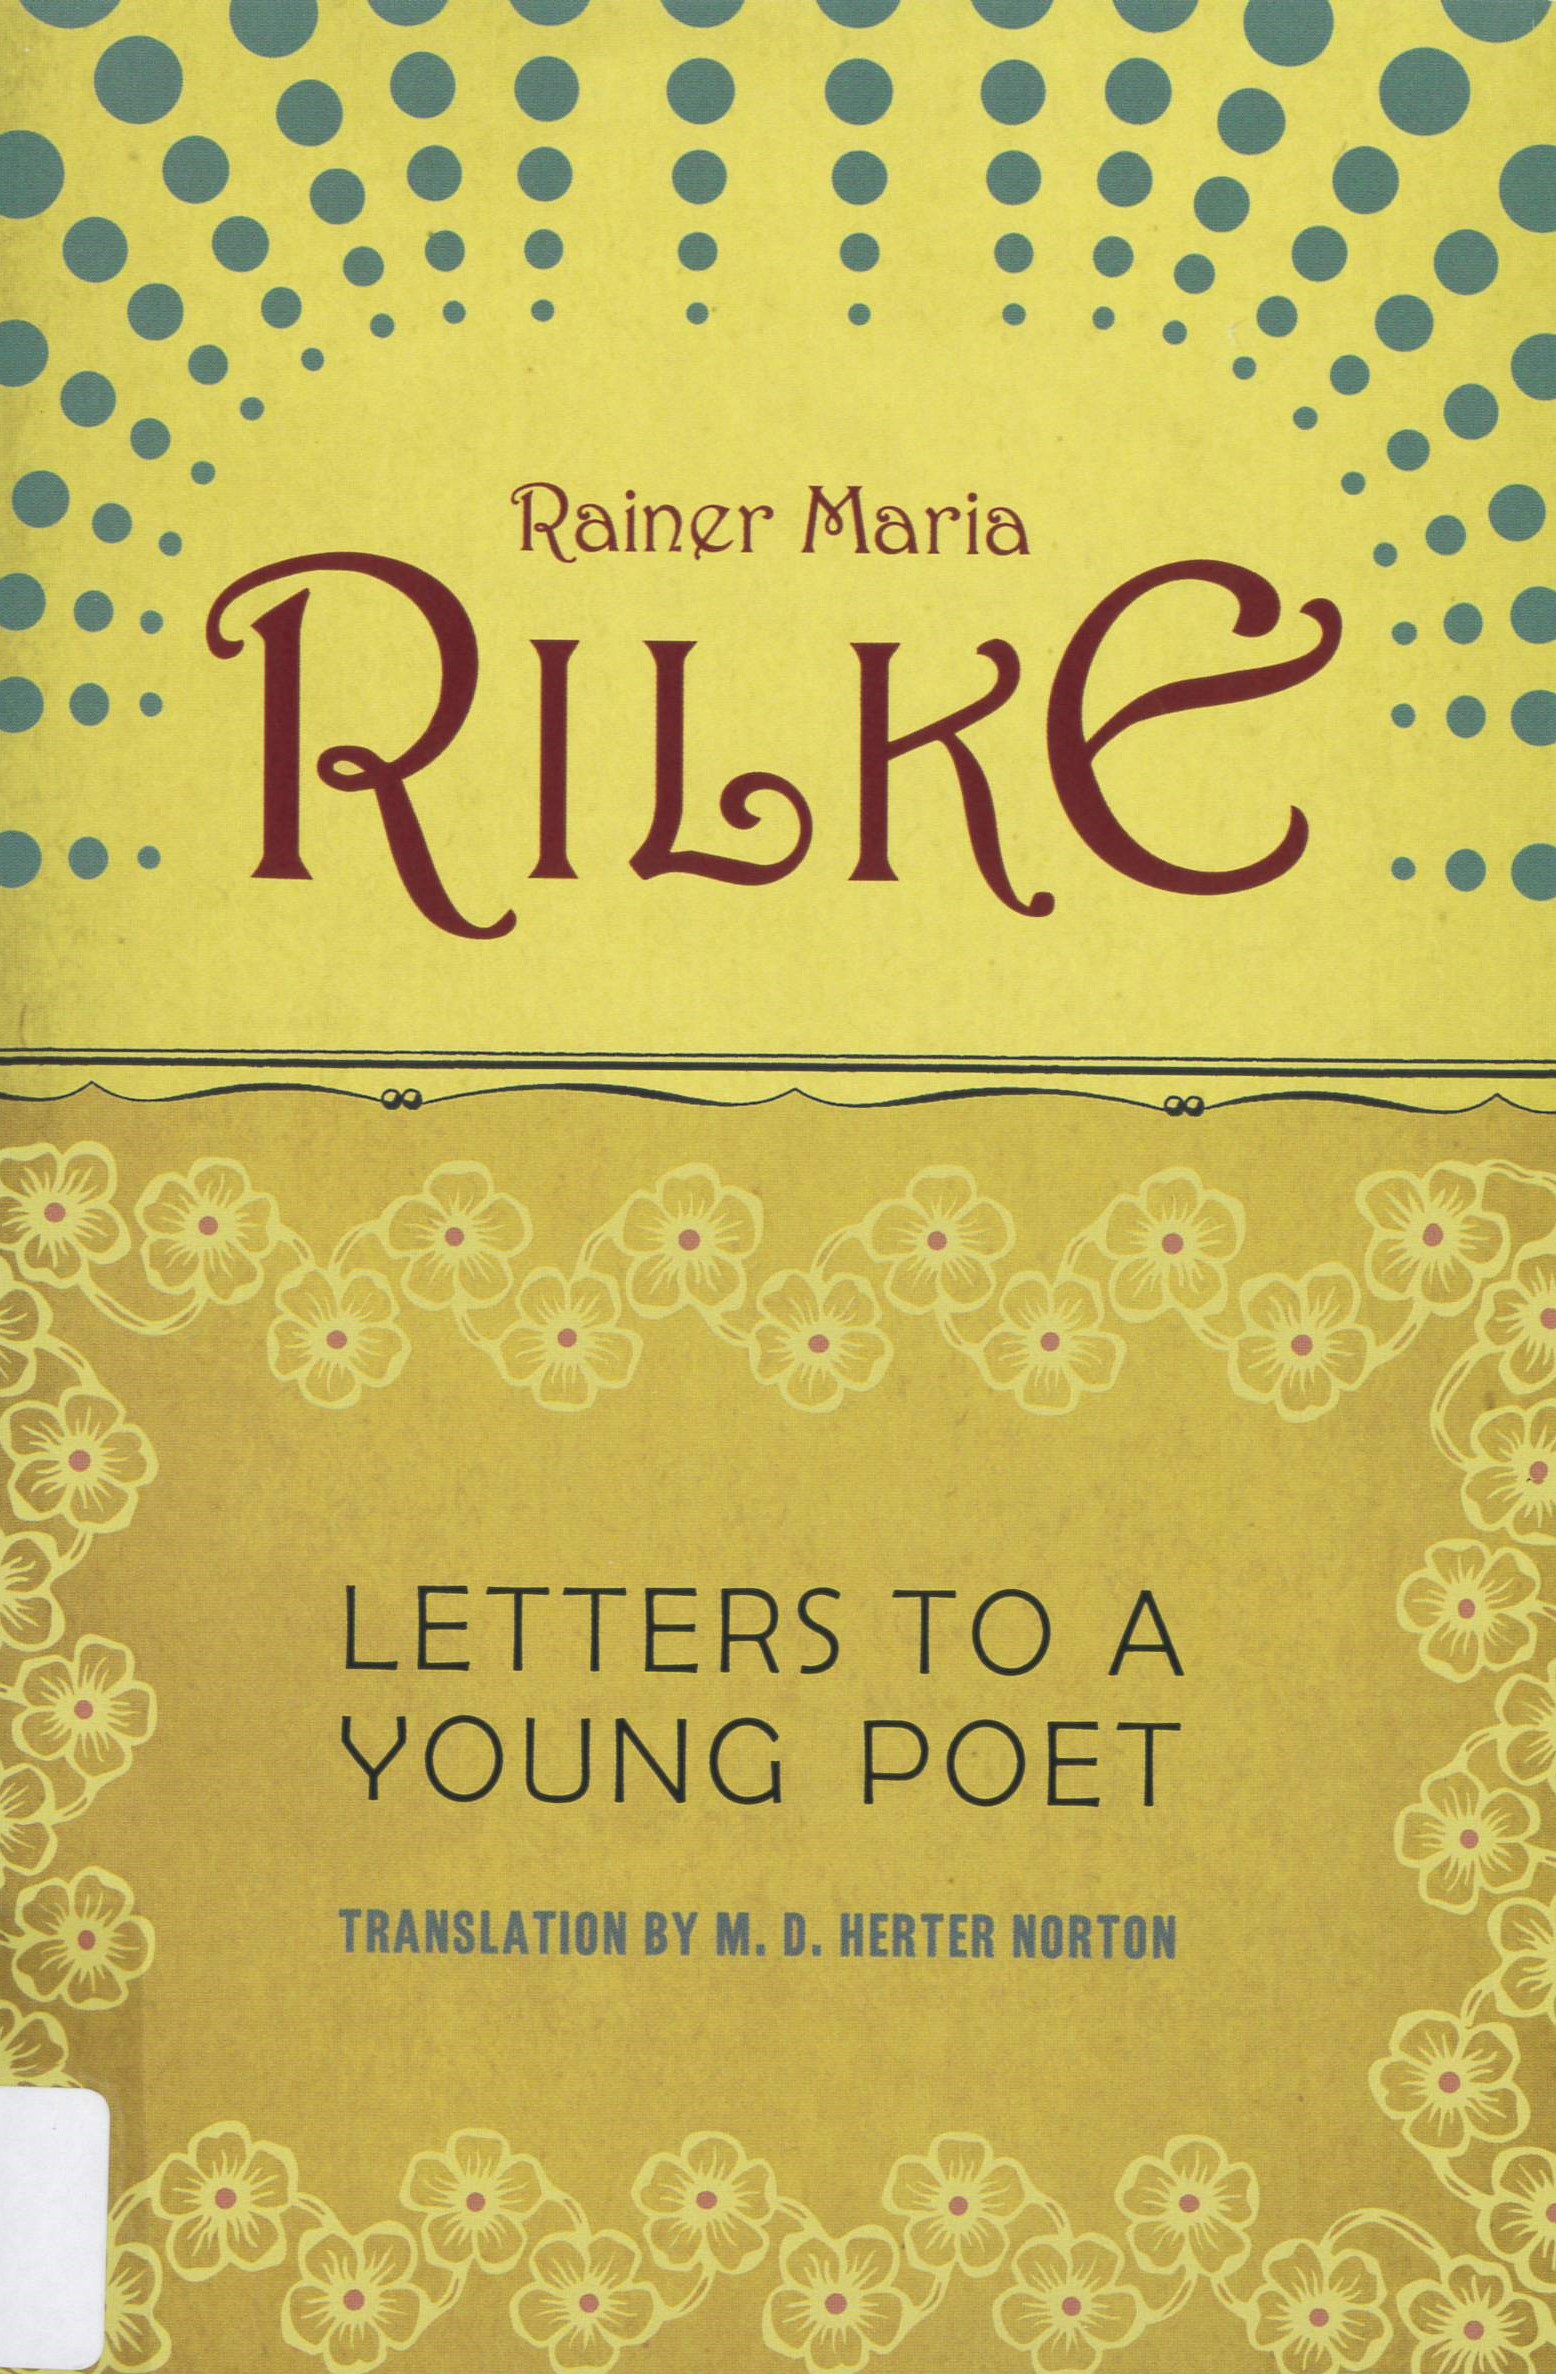 Letters to a Young Poet/